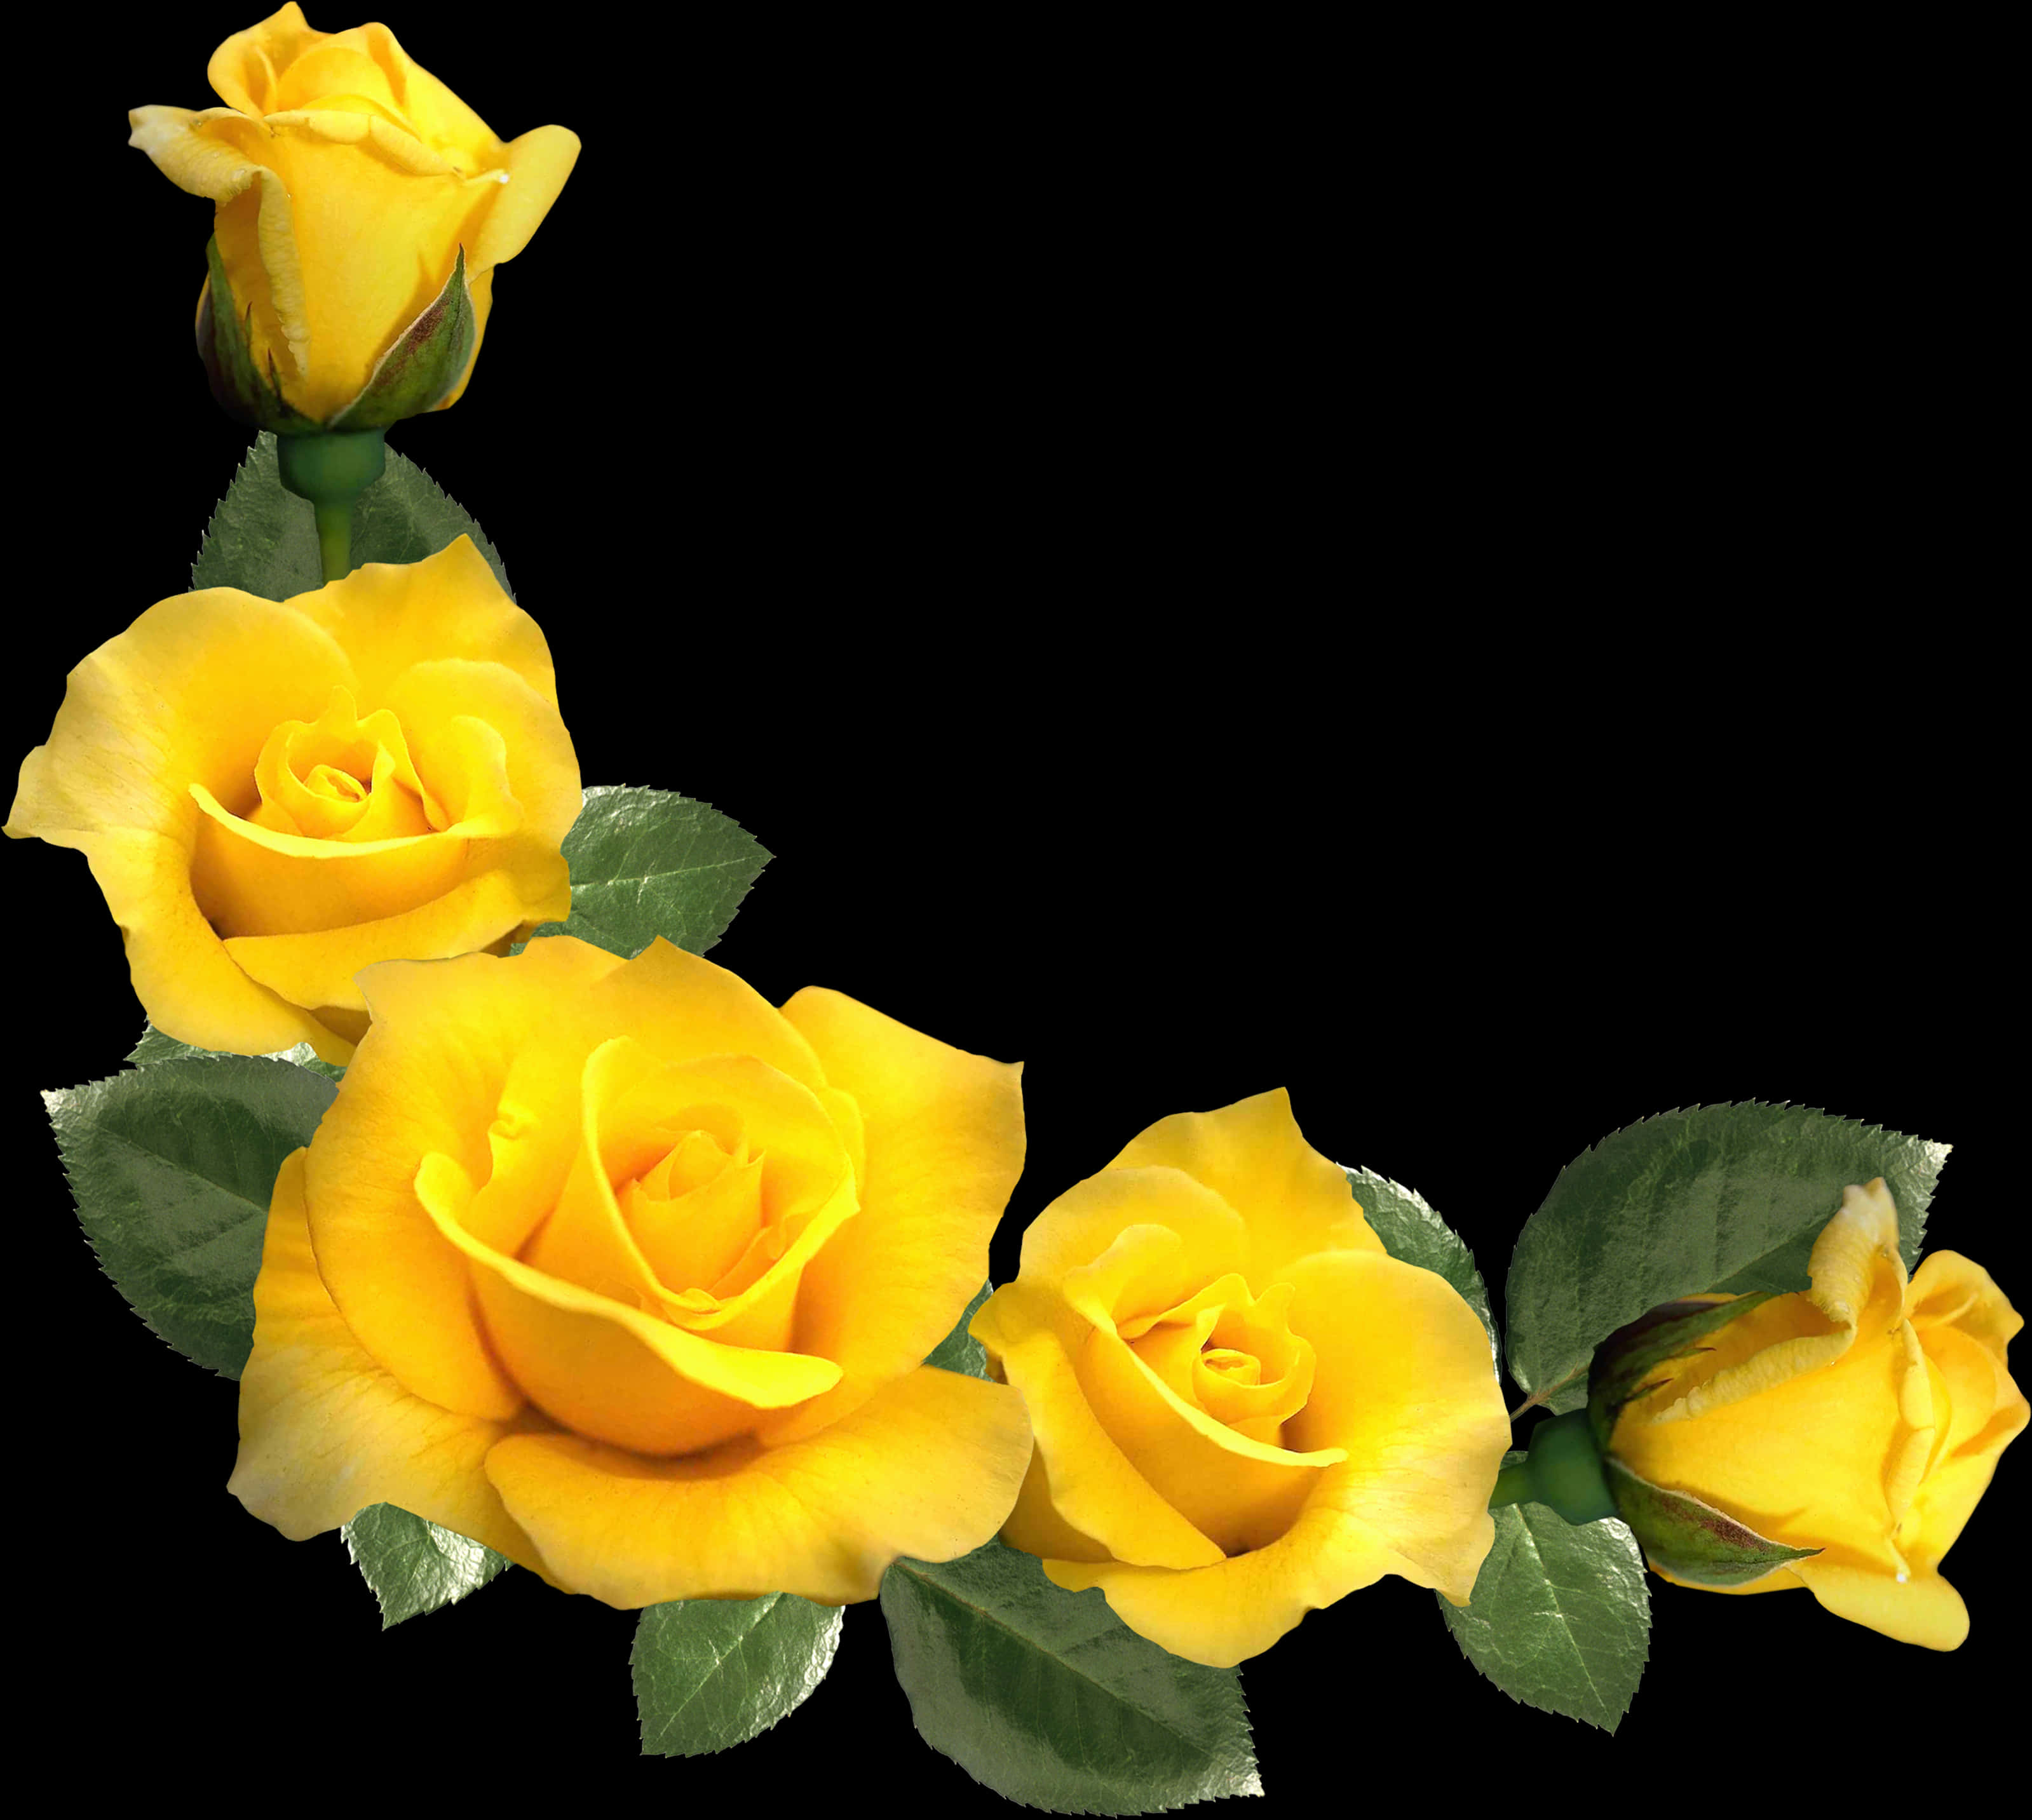 Download Vibrant Yellow Roses Black Background | Wallpapers.com